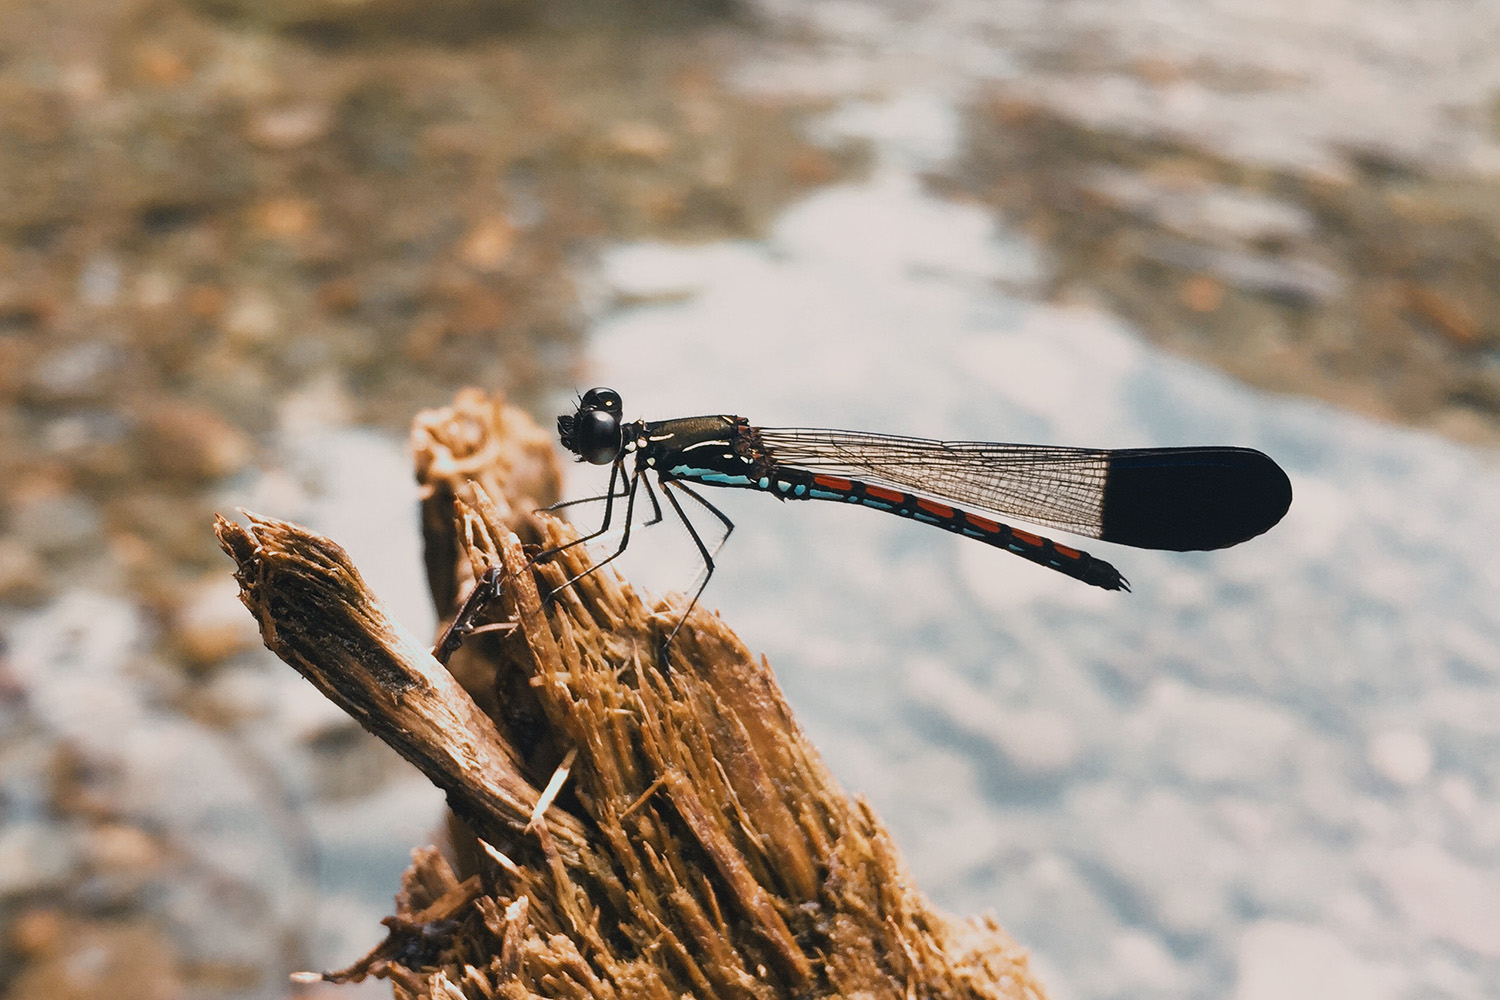 Photograph of a banded demoiselle